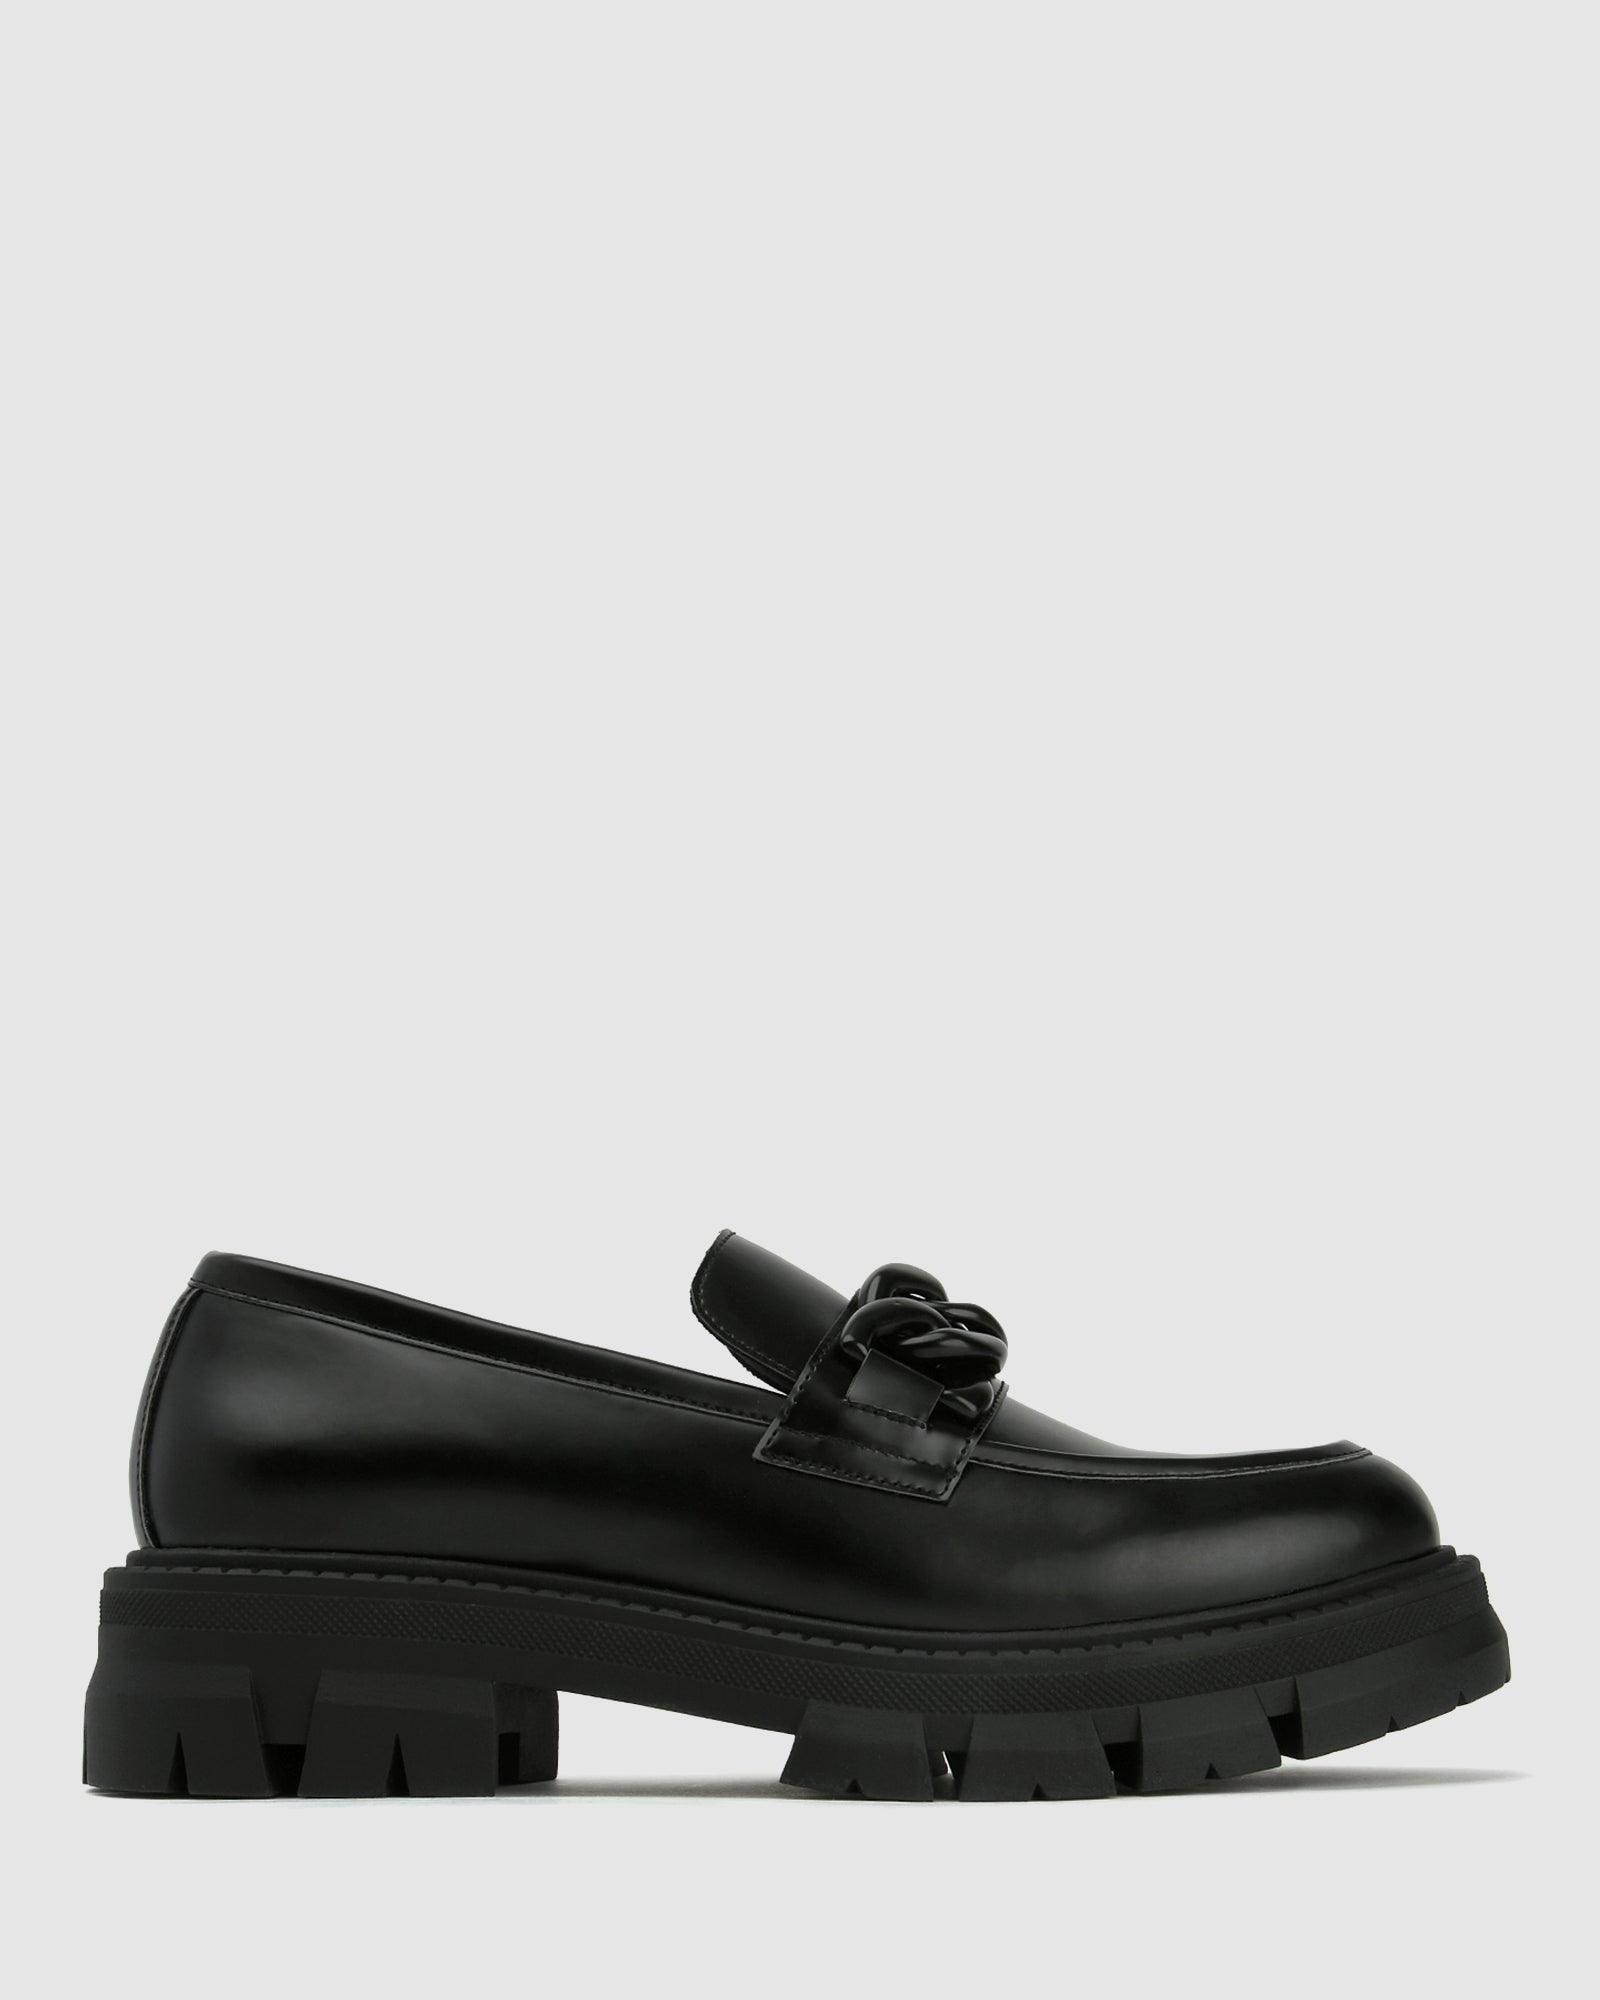 Buy DEMI Chunky Chain Loafers by Betts online - Betts